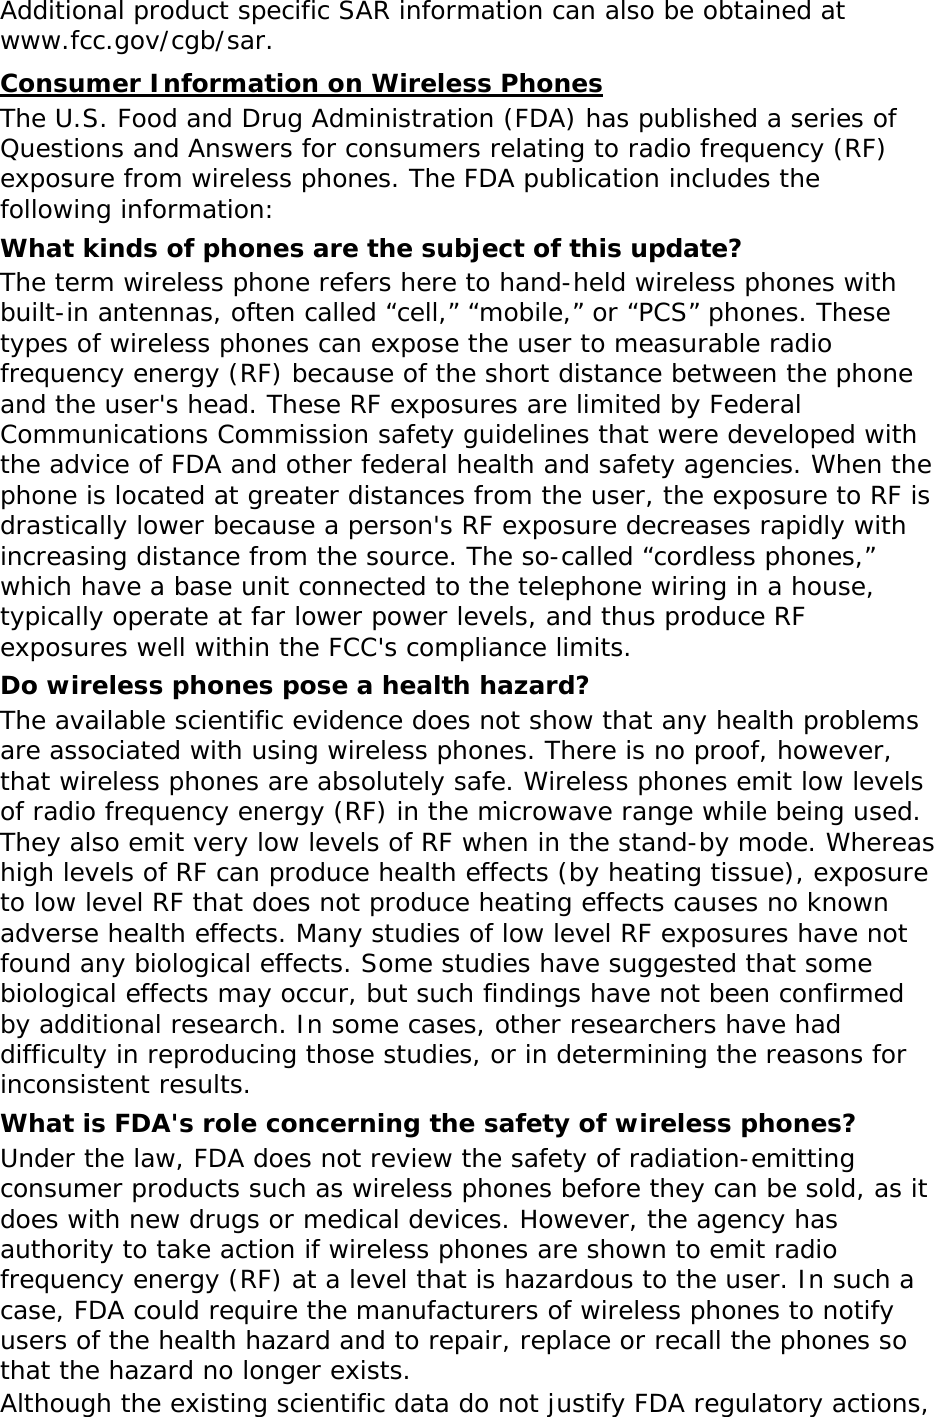 Additional product specific SAR information can also be obtained at www.fcc.gov/cgb/sar. Consumer Information on Wireless Phones The U.S. Food and Drug Administration (FDA) has published a series of Questions and Answers for consumers relating to radio frequency (RF) exposure from wireless phones. The FDA publication includes the following information: What kinds of phones are the subject of this update? The term wireless phone refers here to hand-held wireless phones with built-in antennas, often called “cell,” “mobile,” or “PCS” phones. These types of wireless phones can expose the user to measurable radio frequency energy (RF) because of the short distance between the phone and the user&apos;s head. These RF exposures are limited by Federal Communications Commission safety guidelines that were developed with the advice of FDA and other federal health and safety agencies. When the phone is located at greater distances from the user, the exposure to RF is drastically lower because a person&apos;s RF exposure decreases rapidly with increasing distance from the source. The so-called “cordless phones,” which have a base unit connected to the telephone wiring in a house, typically operate at far lower power levels, and thus produce RF exposures well within the FCC&apos;s compliance limits. Do wireless phones pose a health hazard? The available scientific evidence does not show that any health problems are associated with using wireless phones. There is no proof, however, that wireless phones are absolutely safe. Wireless phones emit low levels of radio frequency energy (RF) in the microwave range while being used. They also emit very low levels of RF when in the stand-by mode. Whereas high levels of RF can produce health effects (by heating tissue), exposure to low level RF that does not produce heating effects causes no known adverse health effects. Many studies of low level RF exposures have not found any biological effects. Some studies have suggested that some biological effects may occur, but such findings have not been confirmed by additional research. In some cases, other researchers have had difficulty in reproducing those studies, or in determining the reasons for inconsistent results. What is FDA&apos;s role concerning the safety of wireless phones? Under the law, FDA does not review the safety of radiation-emitting consumer products such as wireless phones before they can be sold, as it does with new drugs or medical devices. However, the agency has authority to take action if wireless phones are shown to emit radio frequency energy (RF) at a level that is hazardous to the user. In such a case, FDA could require the manufacturers of wireless phones to notify users of the health hazard and to repair, replace or recall the phones so that the hazard no longer exists. Although the existing scientific data do not justify FDA regulatory actions, 